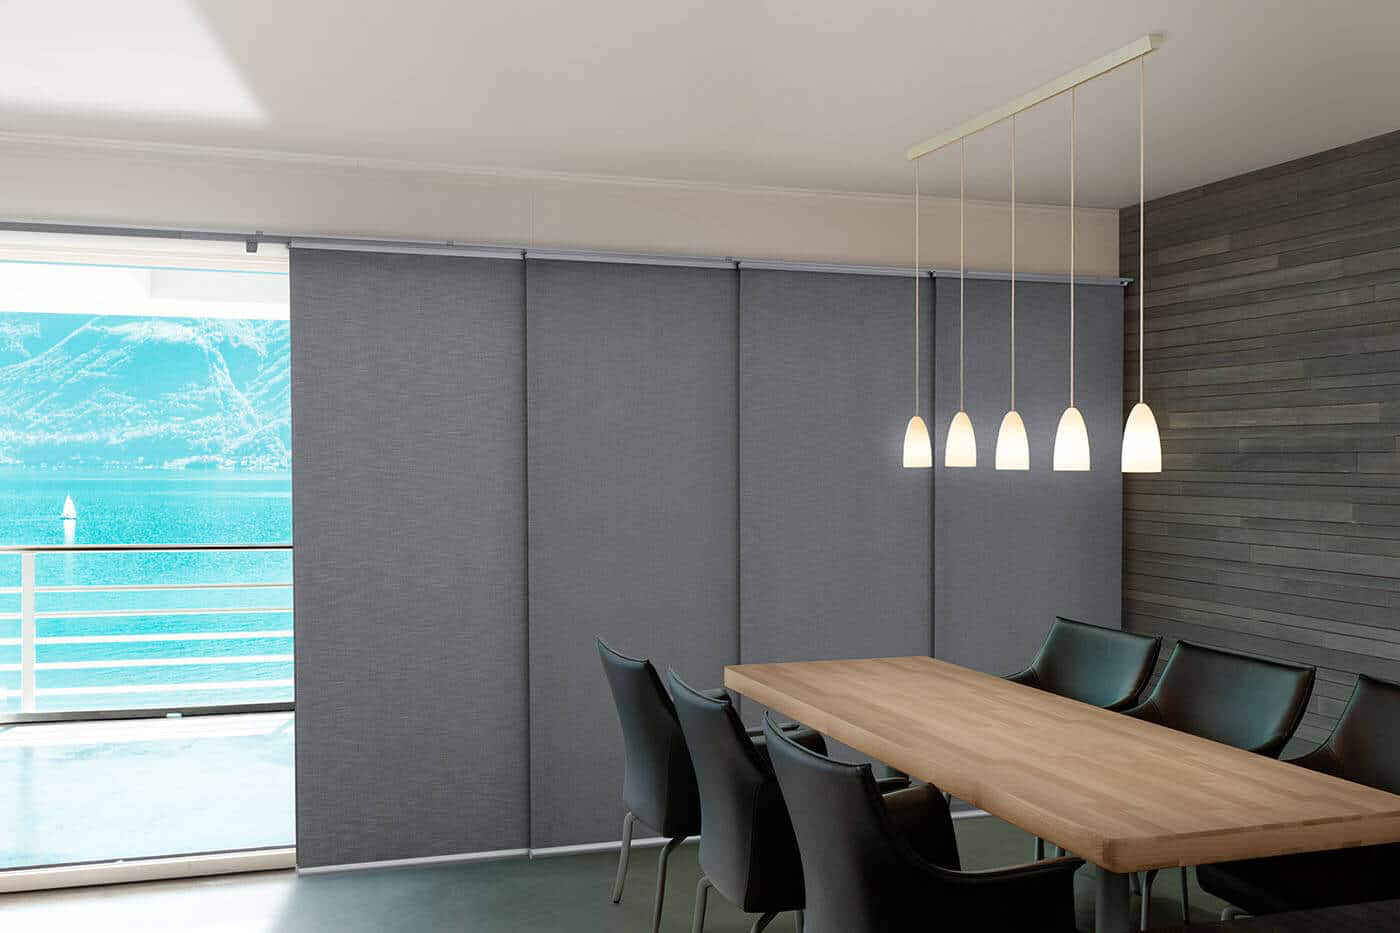 panel blinds